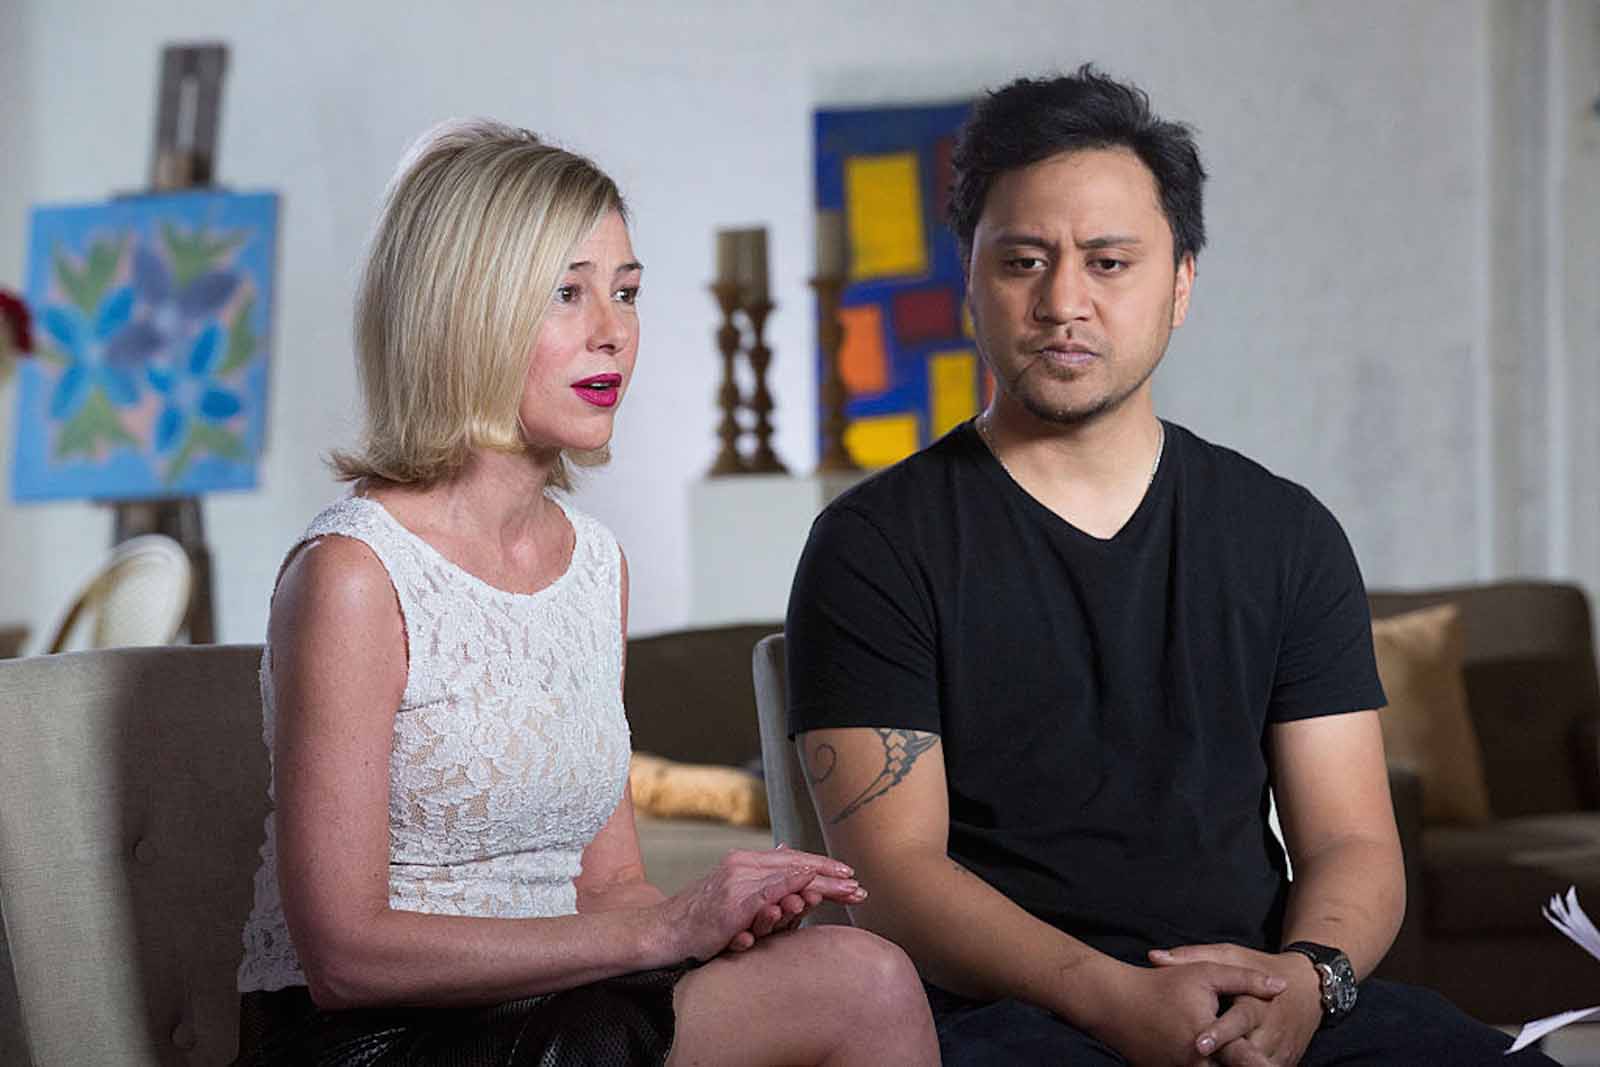 Mary Kay Letourneau spent her lfie being a controversial figure, but she was a loving wife to Vili Fualaau. He's now sharing what her final days were like. 